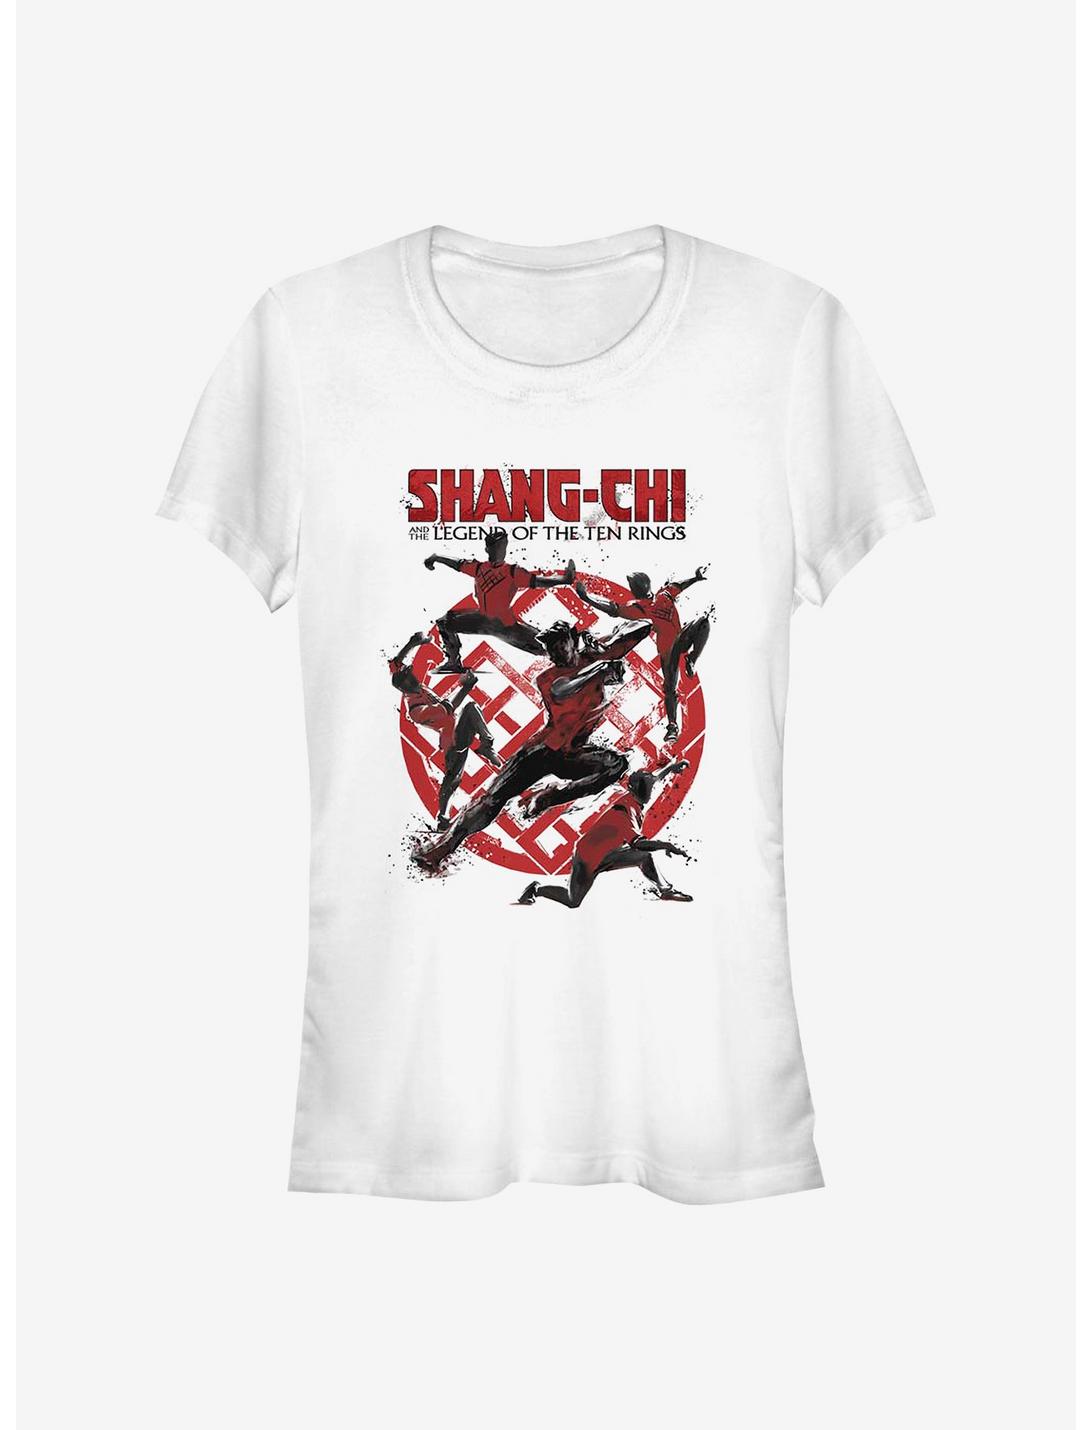 Marvel Shang-Chi And The Legend Of The Ten Rings Crane Fist Girls T-Shirt, WHITE, hi-res